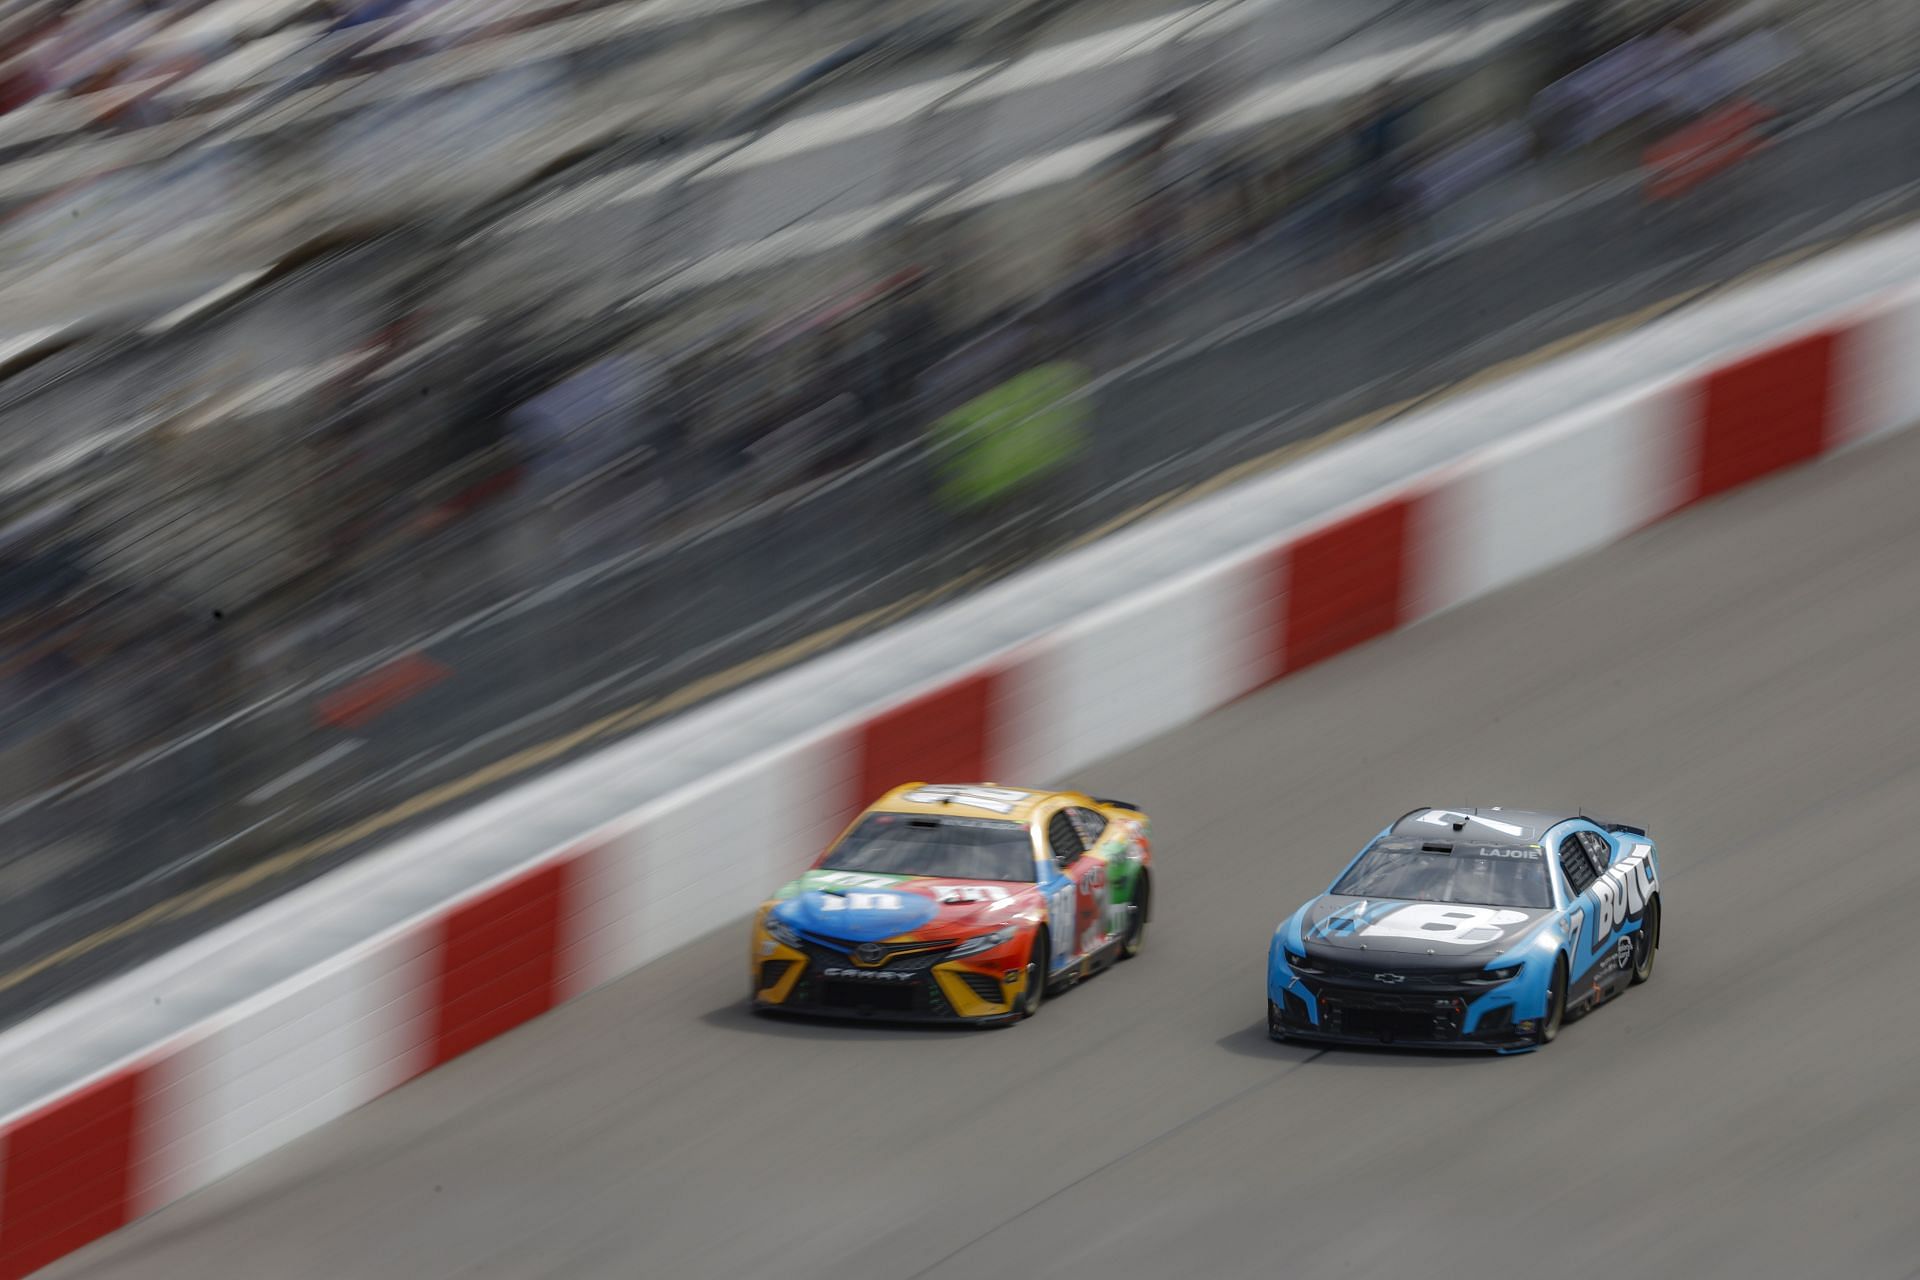 Corey LaJoie (right) and Kyle Busch (left) race during the NASCAR Cup Series Federated Auto Parts 400 at Richmond Raceway